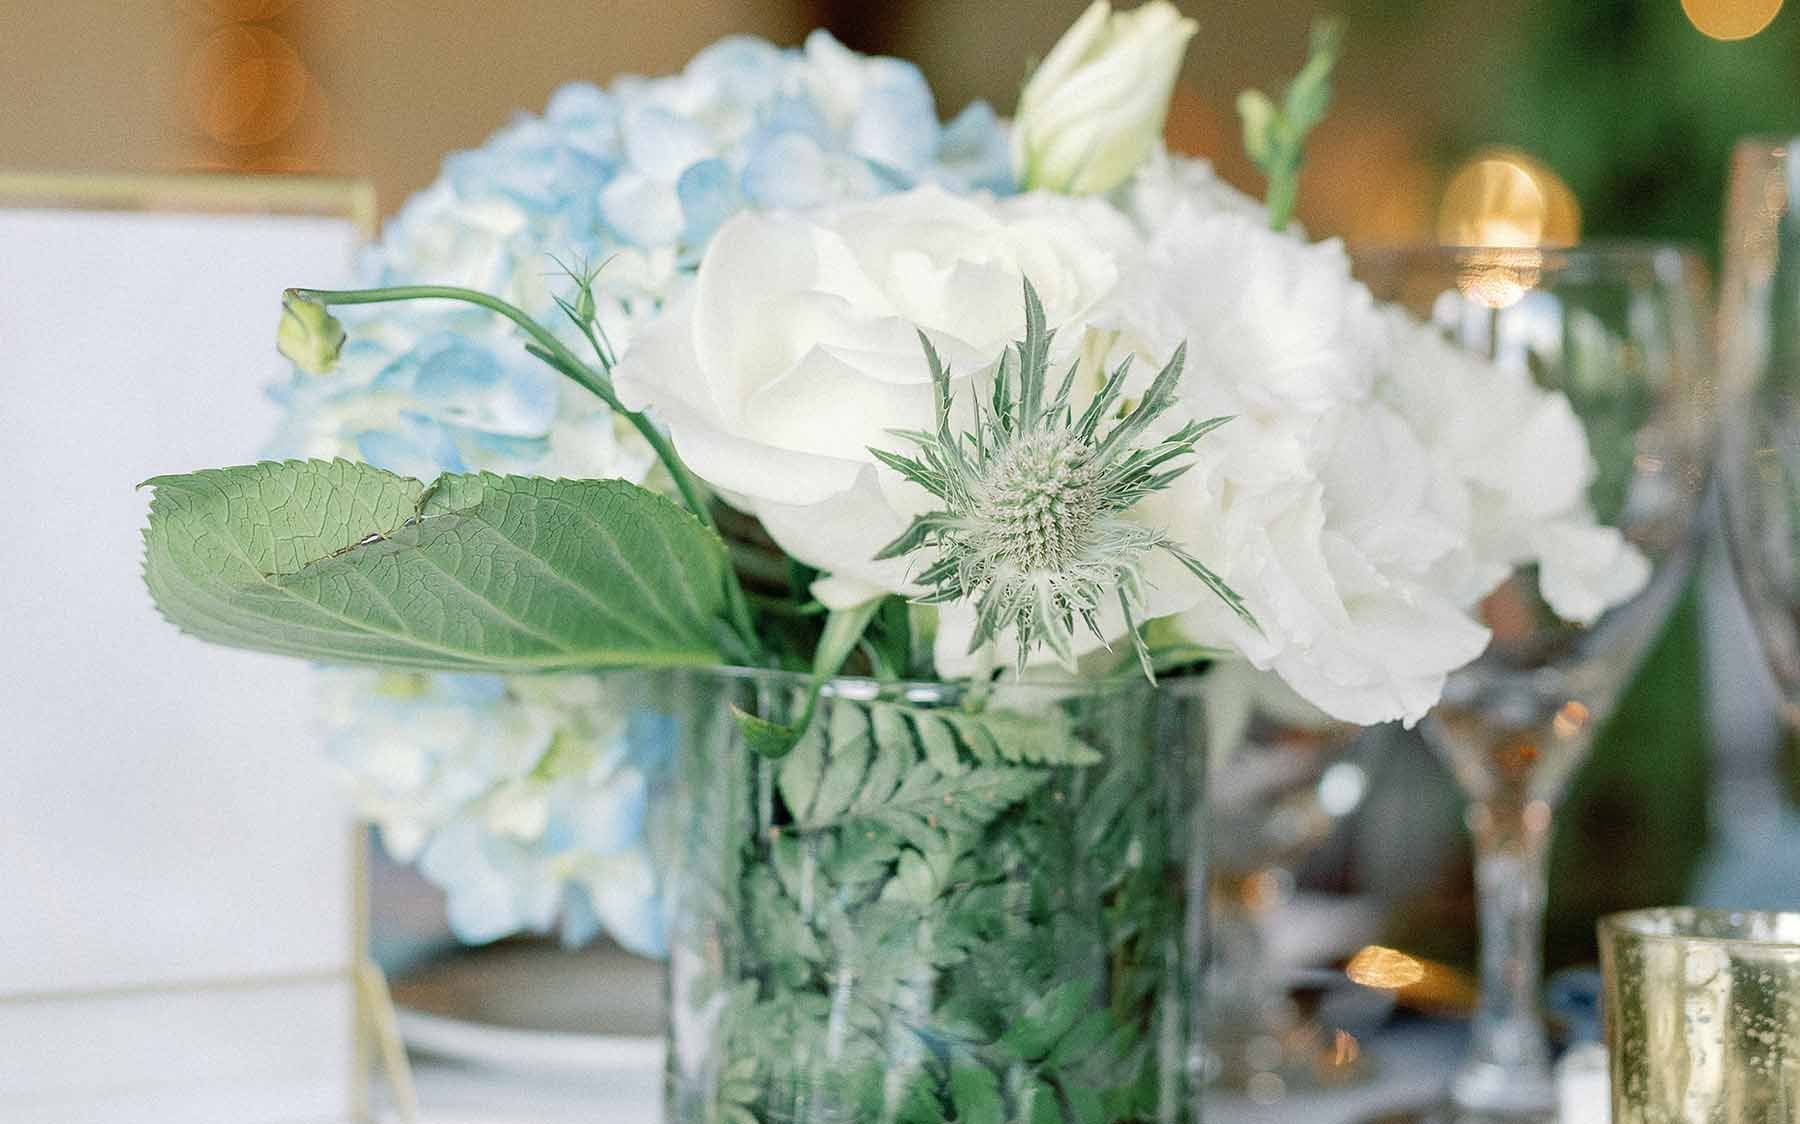 Blue and white flowers in a glass vase on a table.